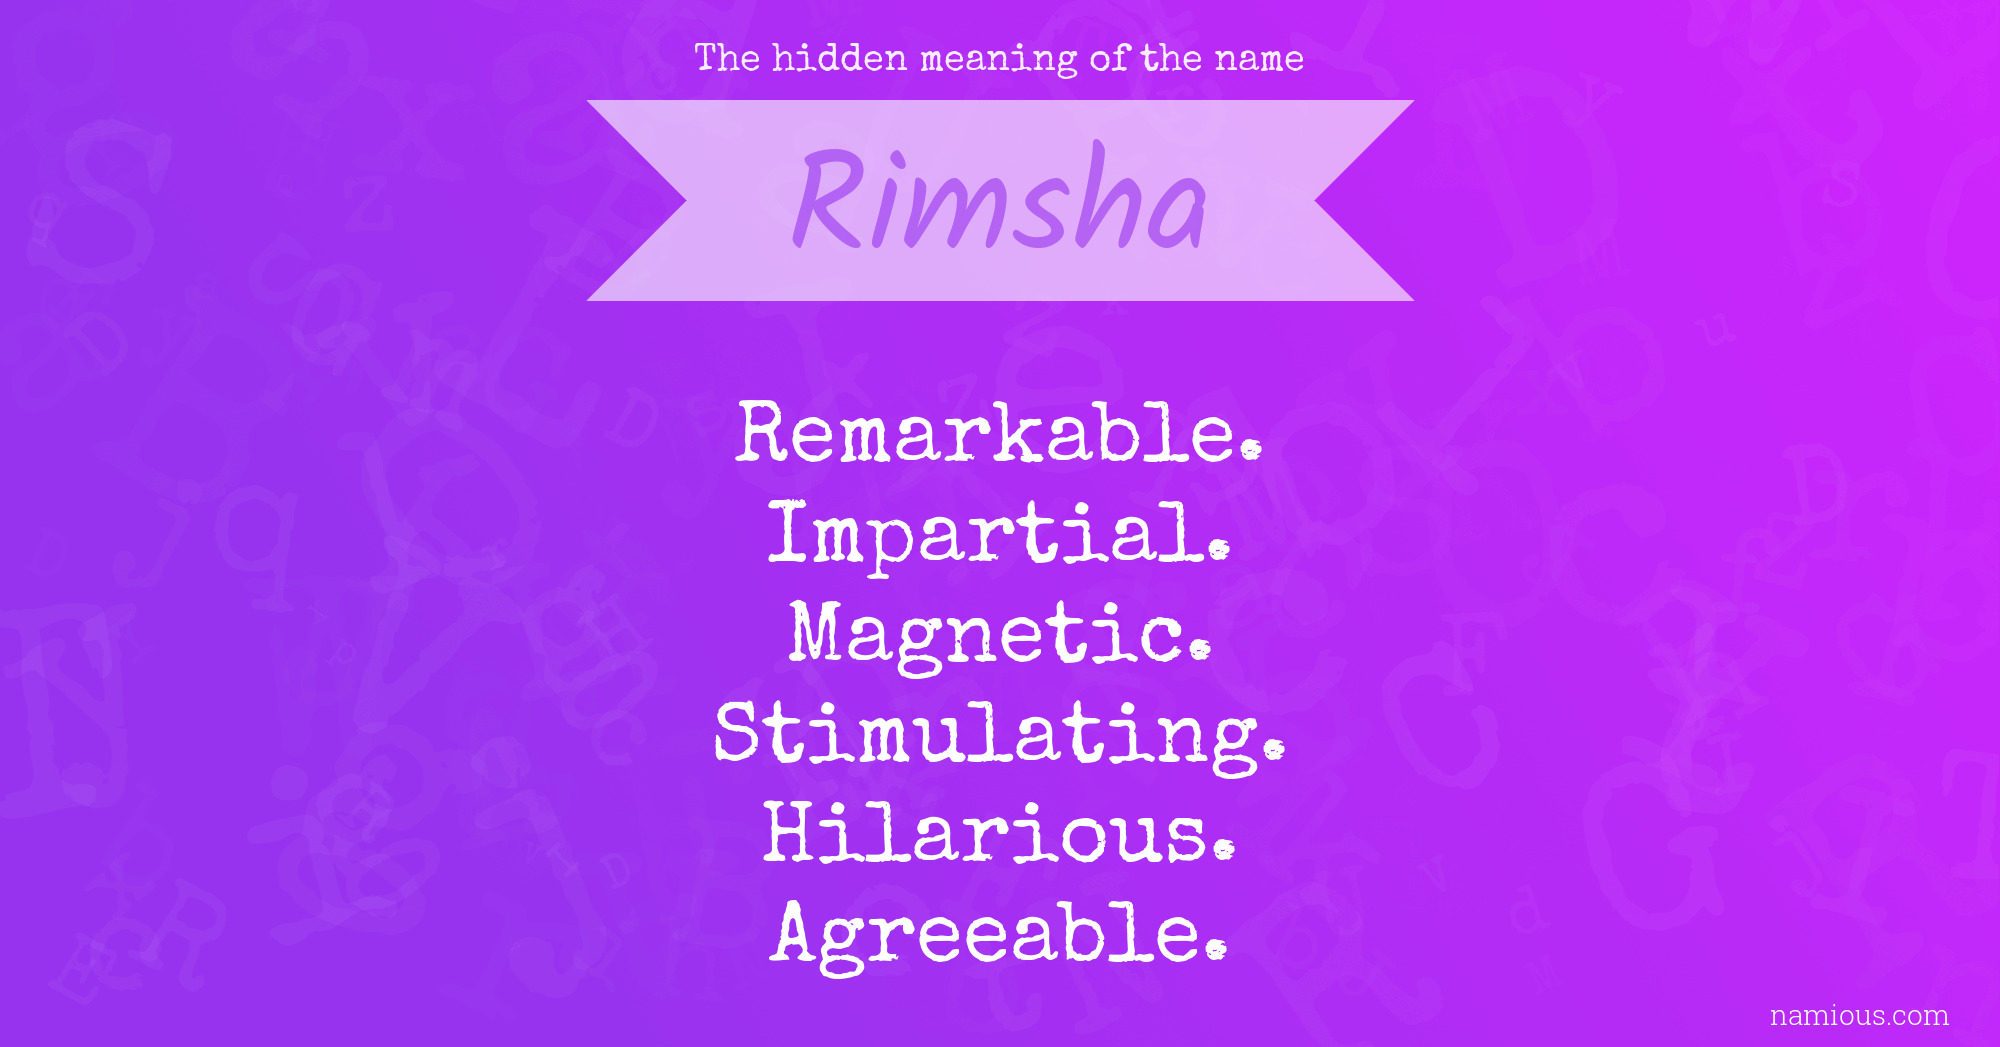 The hidden meaning of the name Rimsha